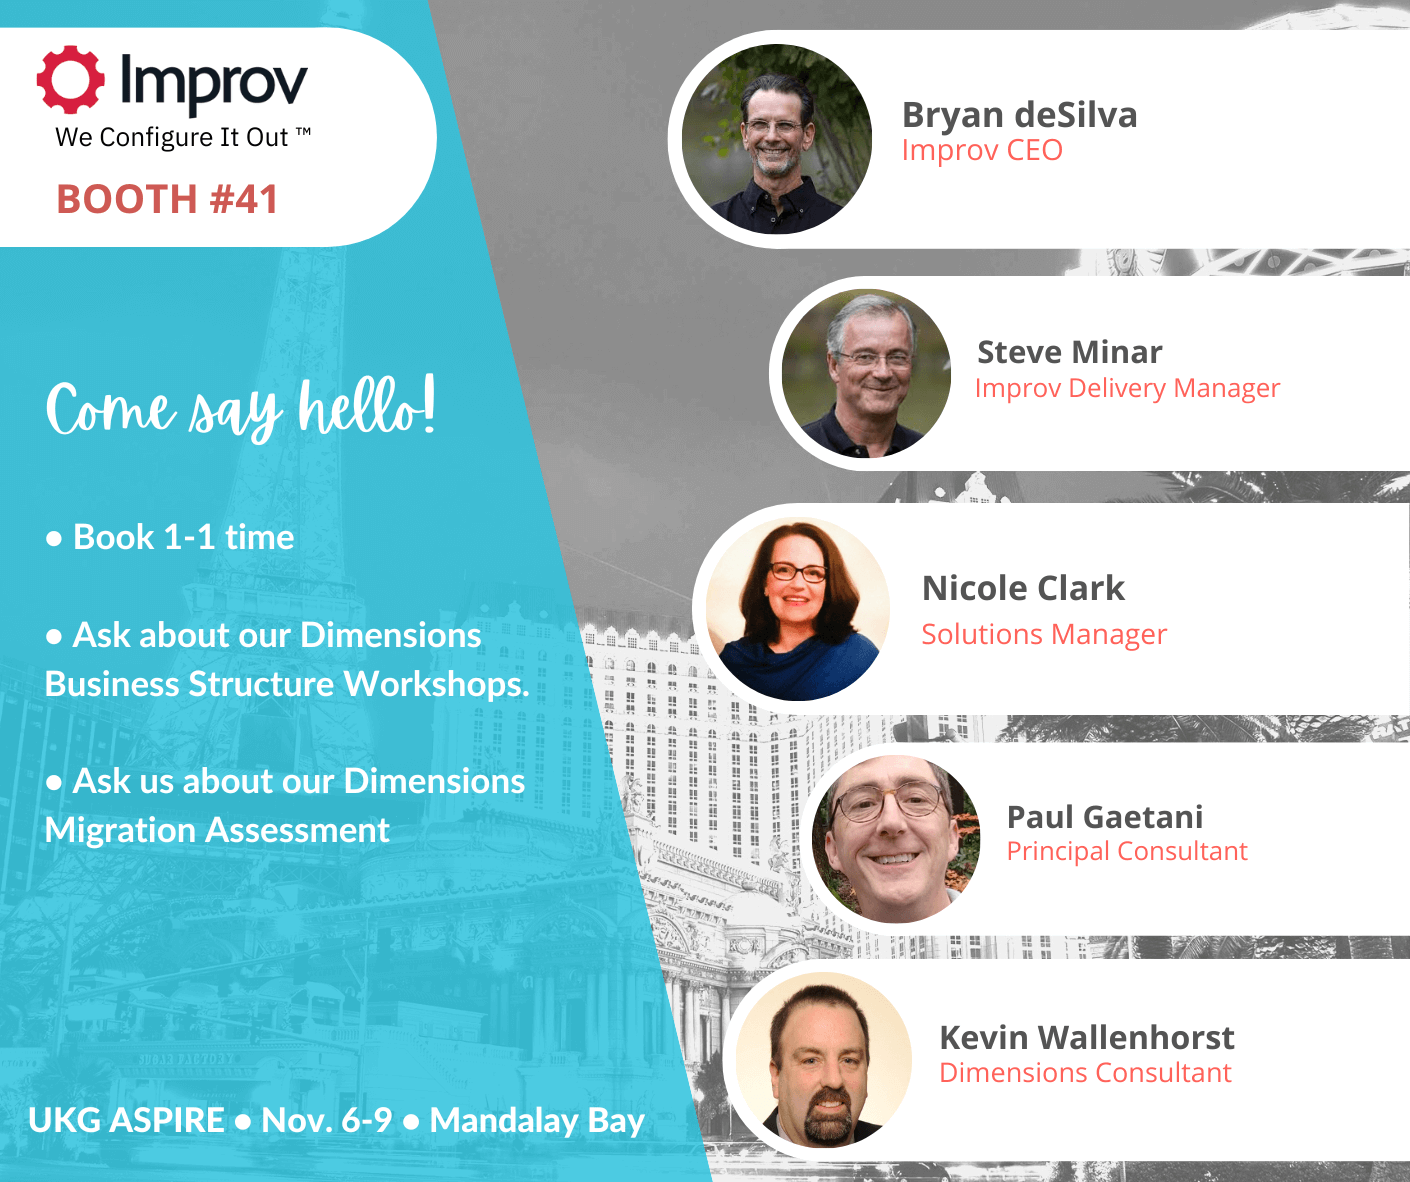 Come see the Improv team, booth #41